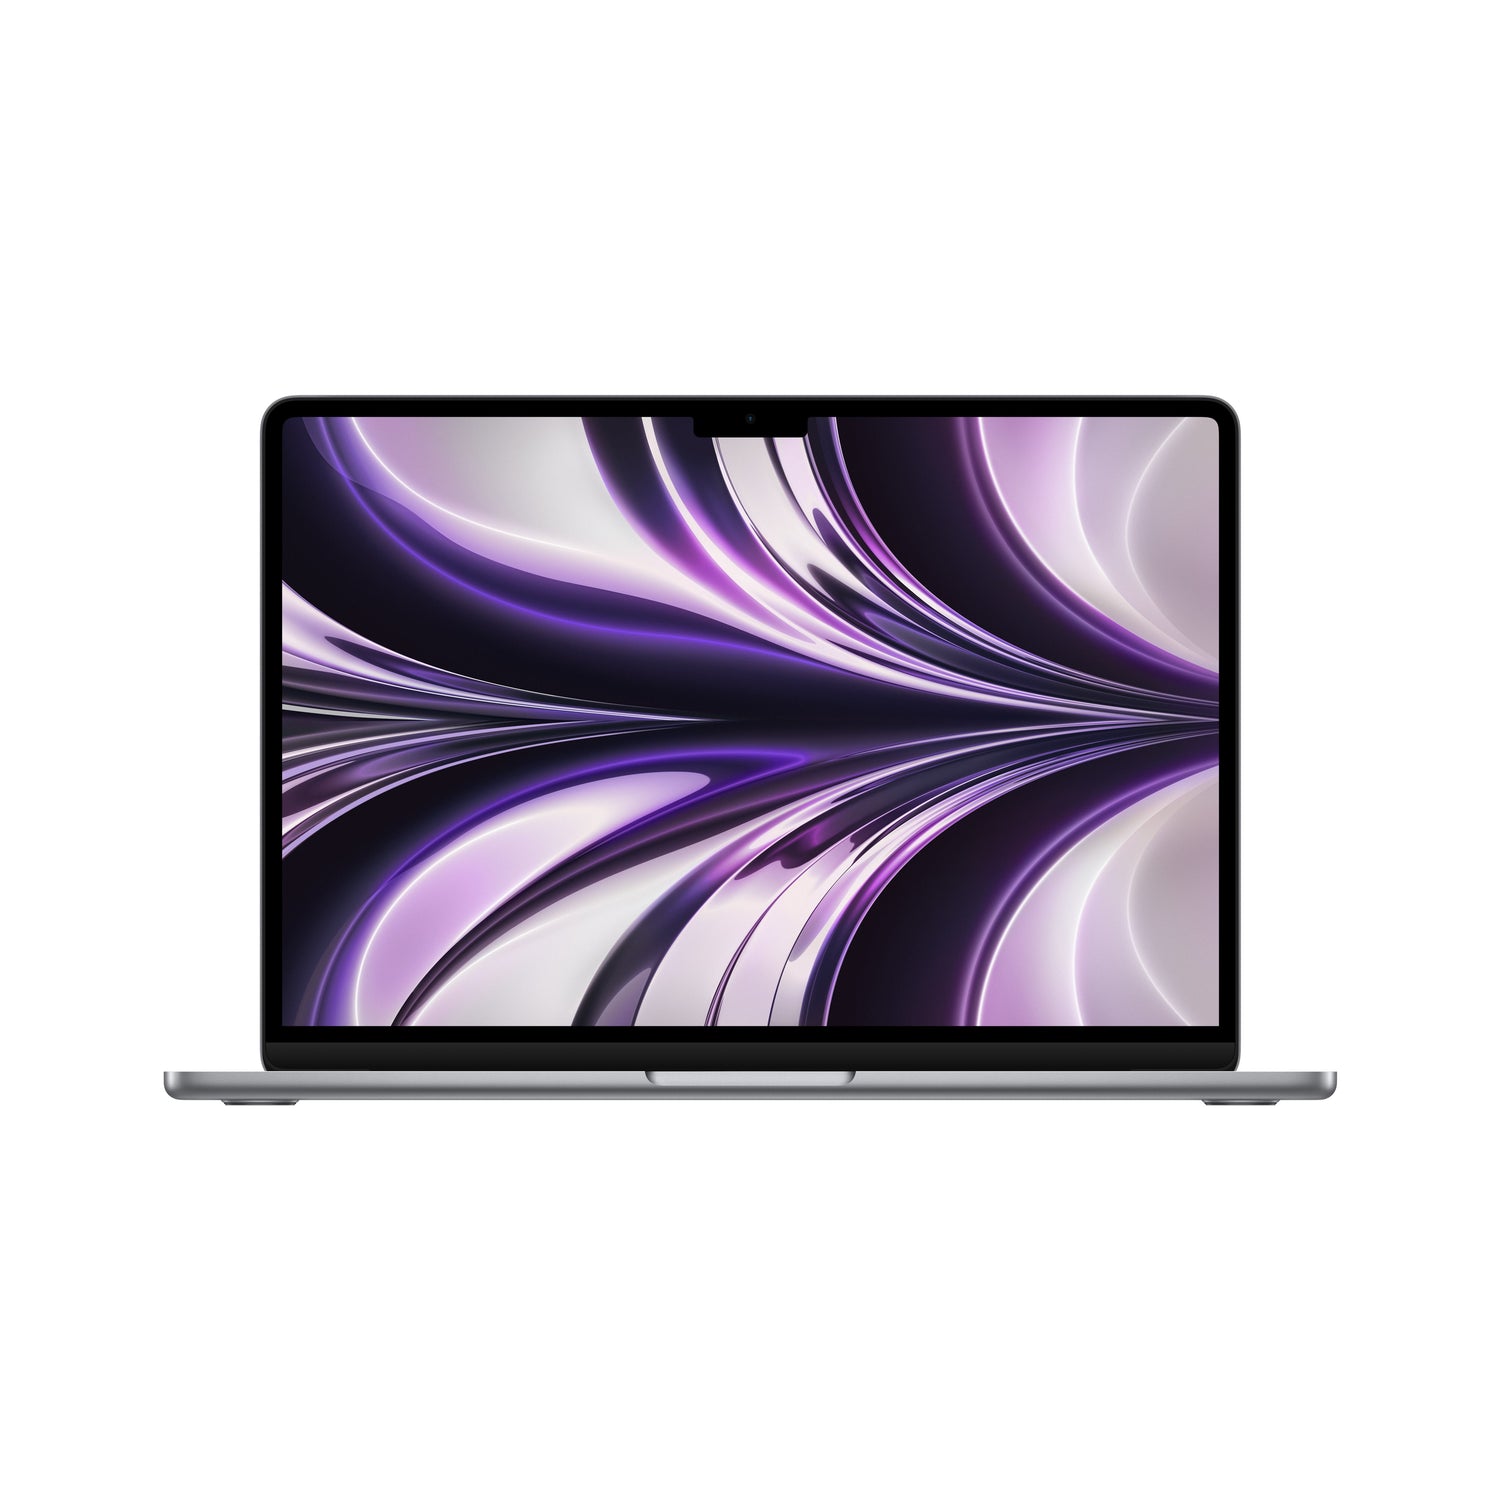 13-inch MacBook Pro: Apple M2 chip with 8‑core CPU and 10‑core GPU, 256GB SSD - Space Gray